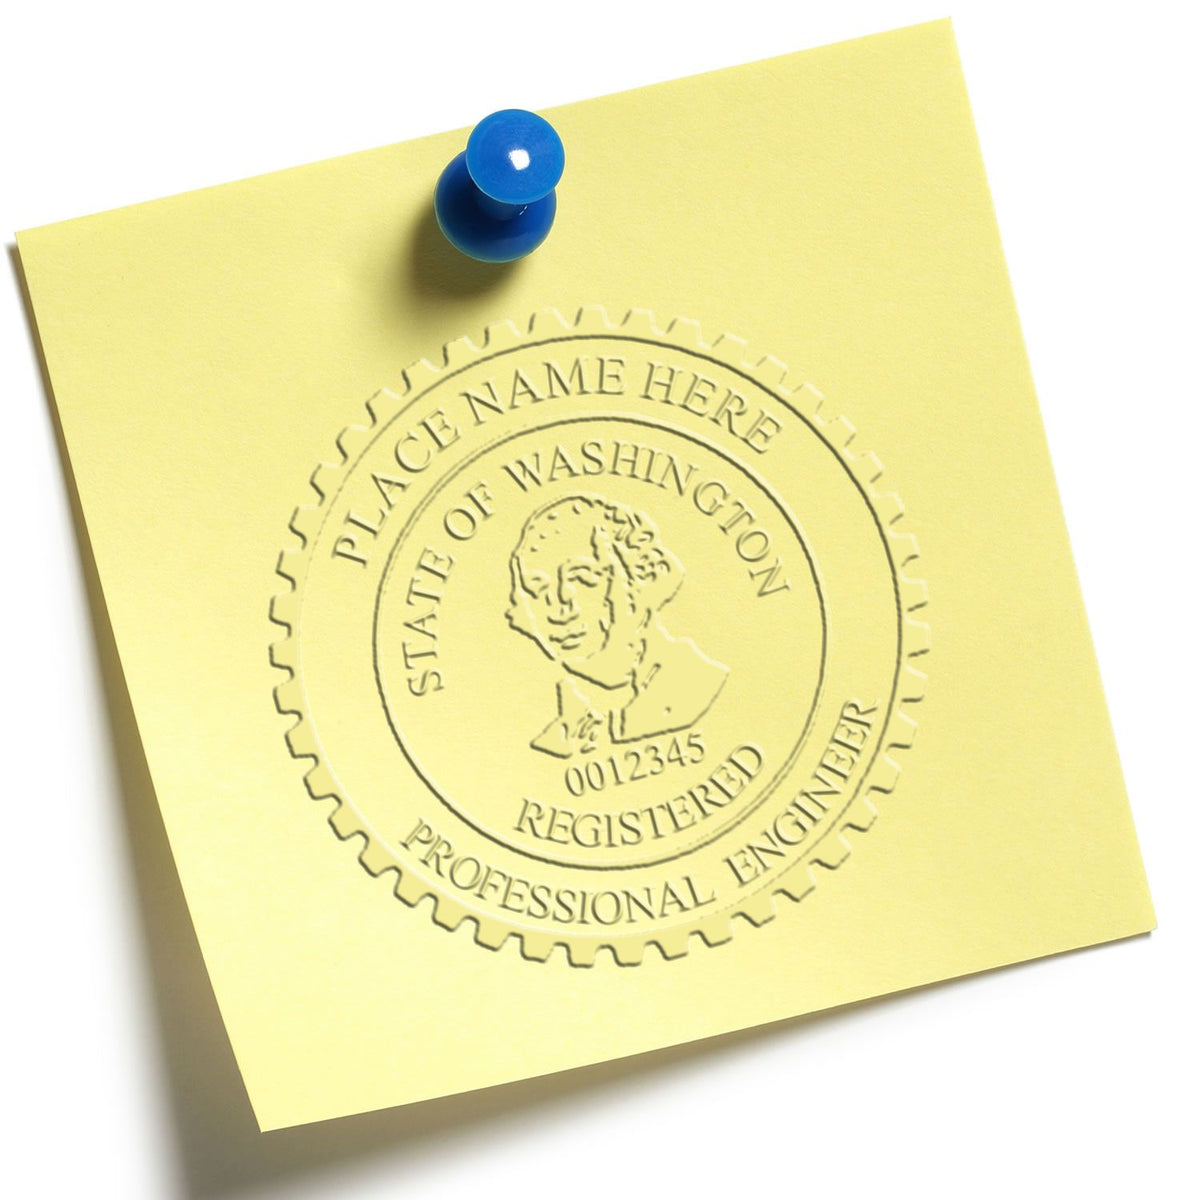 An in use photo of the Gift Washington Engineer Seal showing a sample imprint on a cardstock